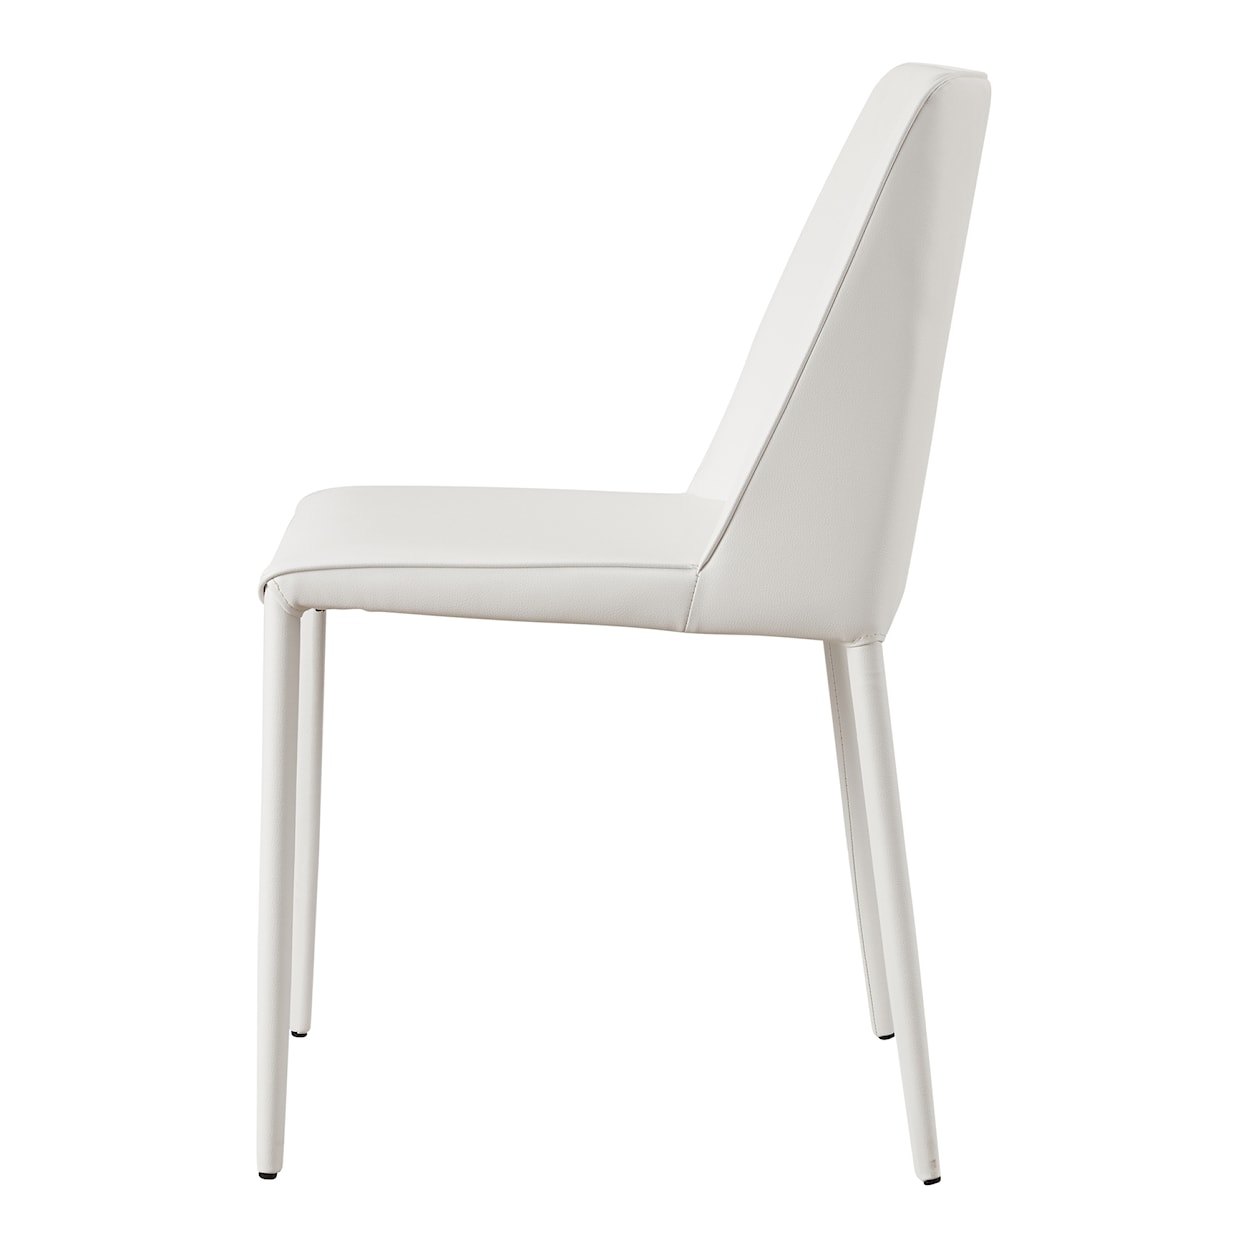 Moe's Home Collection Nora White Vegan Leather Dining Chair